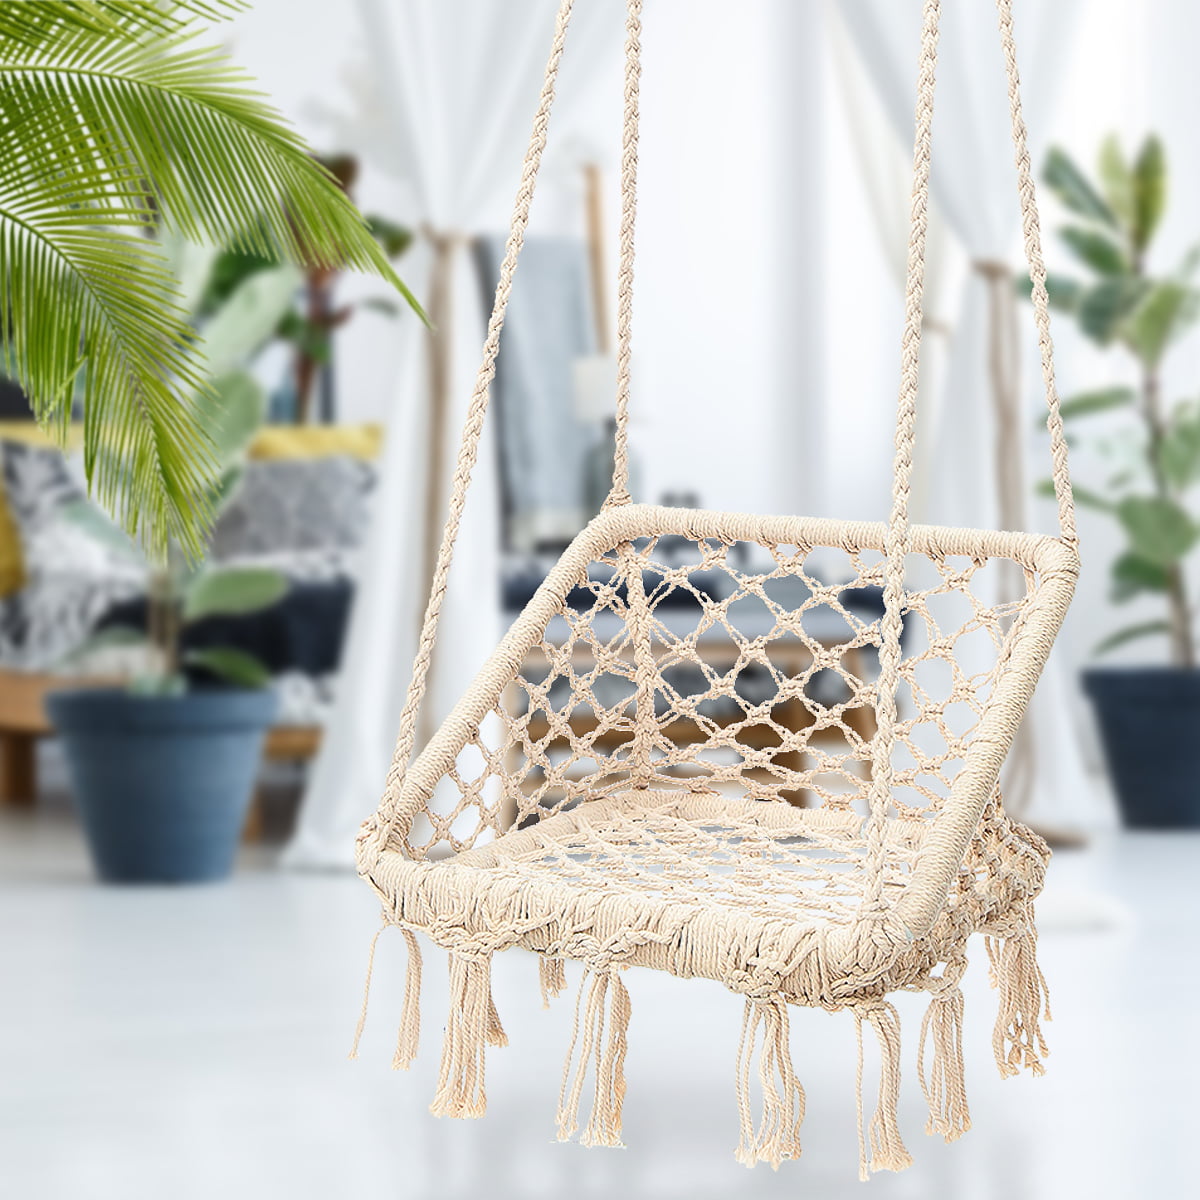 Green New Hammock Chair Swing Handmade Knitted Kids Swing Seat Macrame Hammock Hanging Chair Swing Adjustable Ropes Heavy Duty Rope Play Children Swing Set for Indoor Outdoor